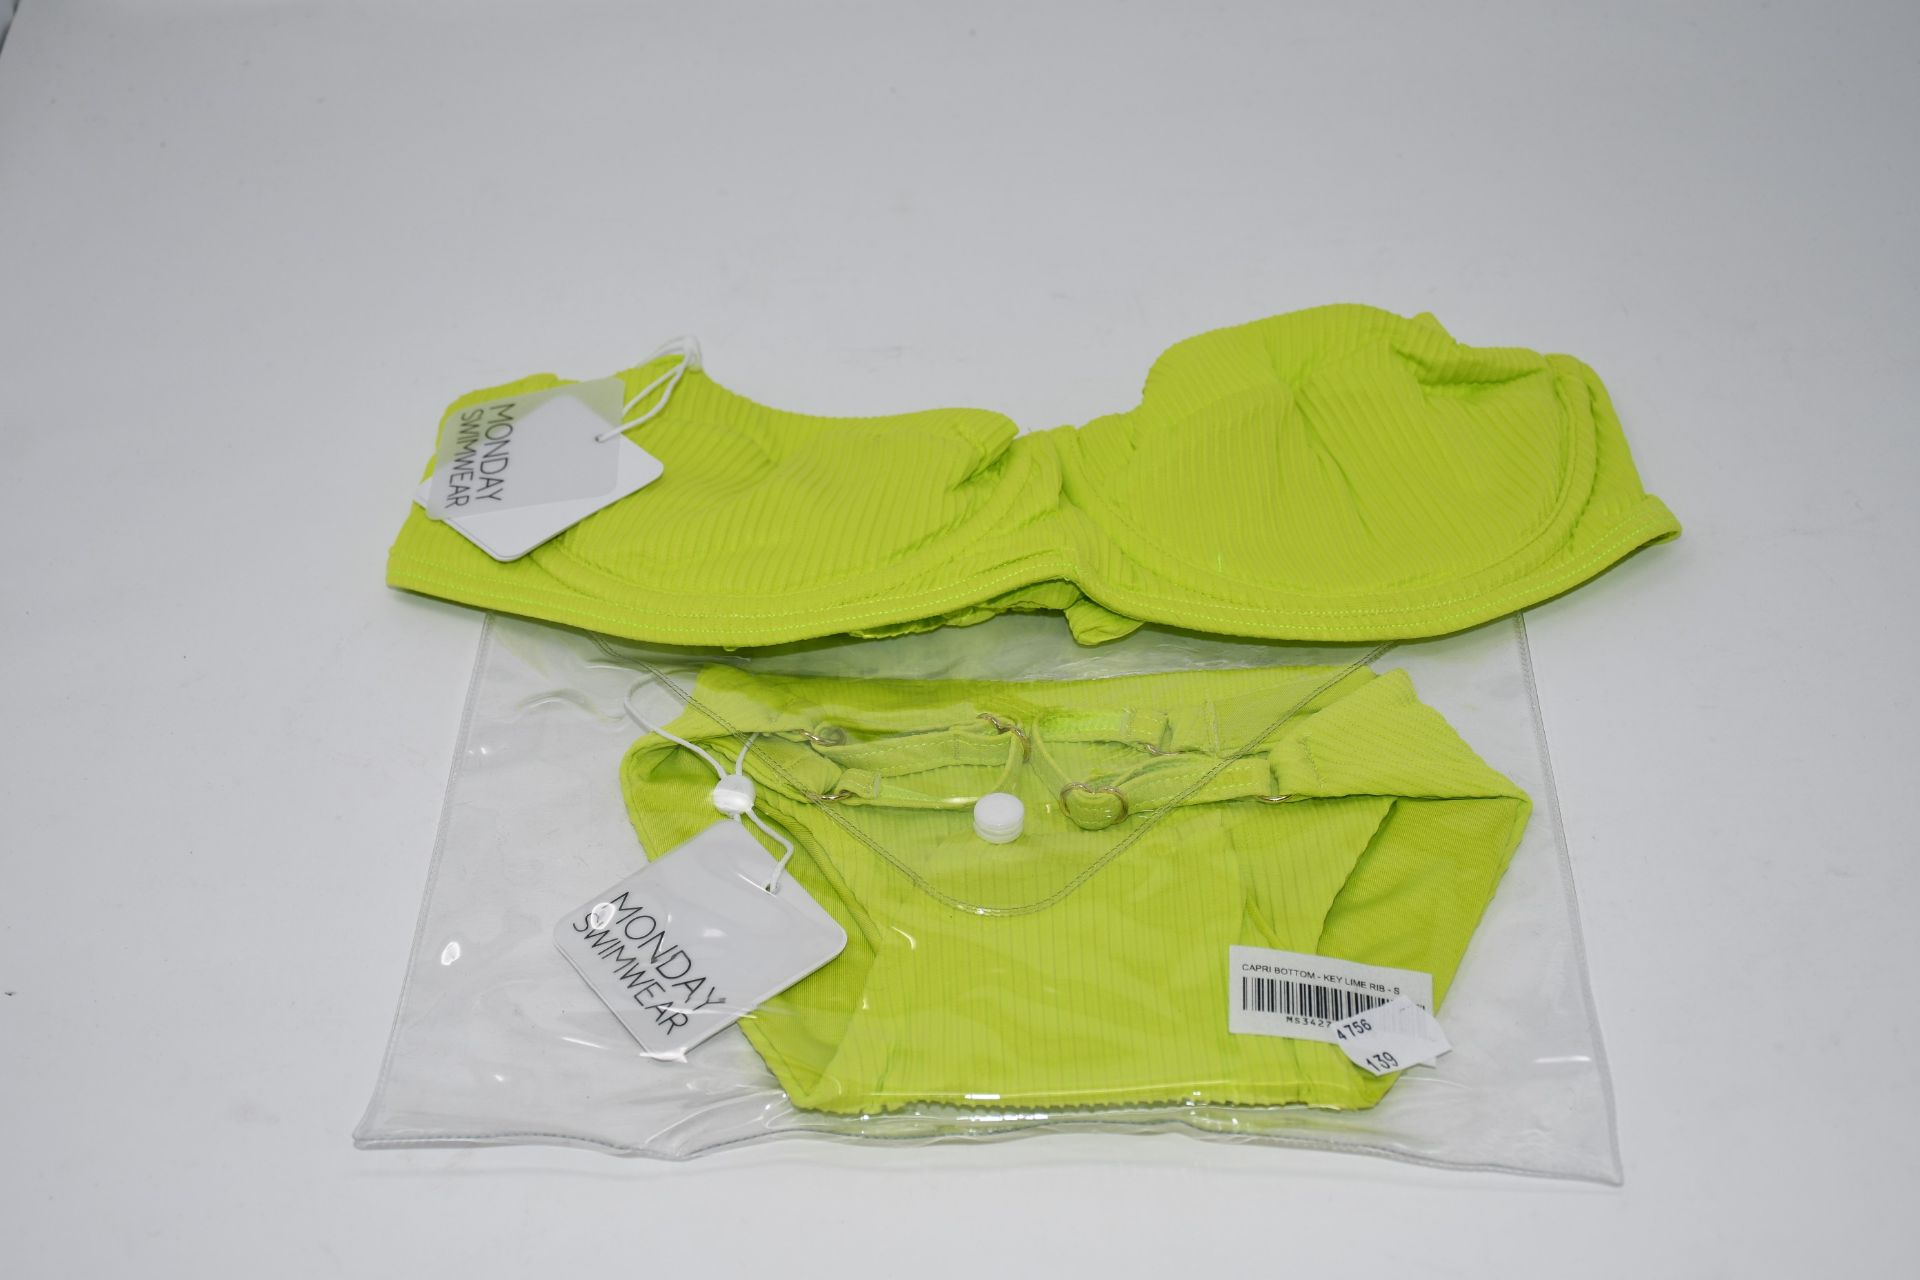 One as new Monday Swimwear Clovelly Top Lime size M. One as new Monday Swimwear Capri bottom Lime